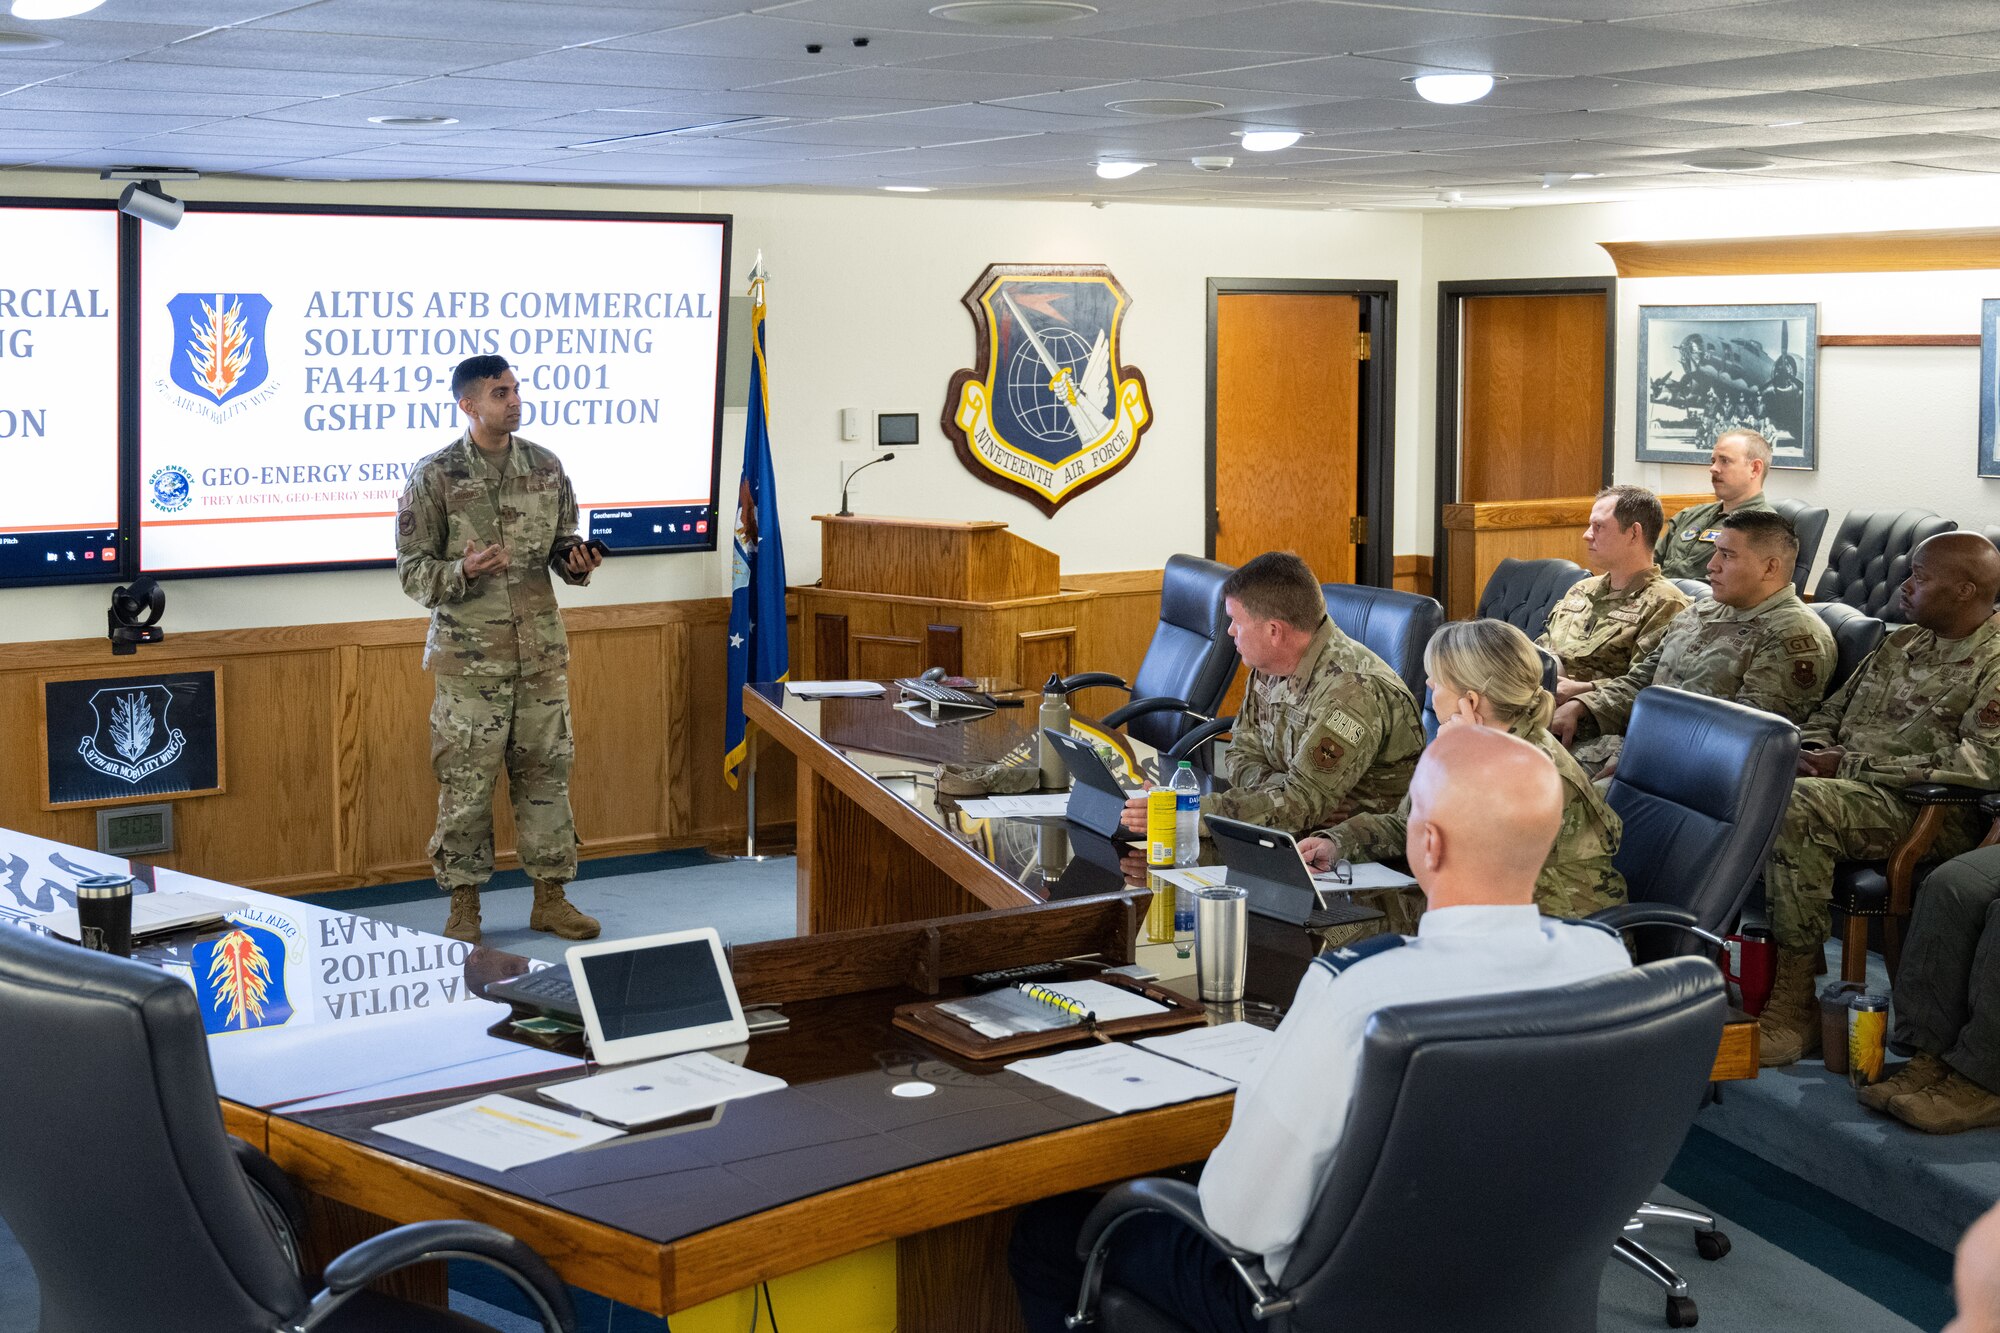 U.S. Air Force Capt. M. Husein Dharas, 97th Contracting Squadron services and constructive flights officer in charge, briefs an audience during pitch day at Altus Air Force Base, Oklahoma, April 15, 2024. The pitch day was held to give small businesses the opportunity to innovate and find solutions to problems the 97th Air Mobility Wing faces. (U.S. Air Force Photo by Airman 1st Class Jonah G. Bliss)